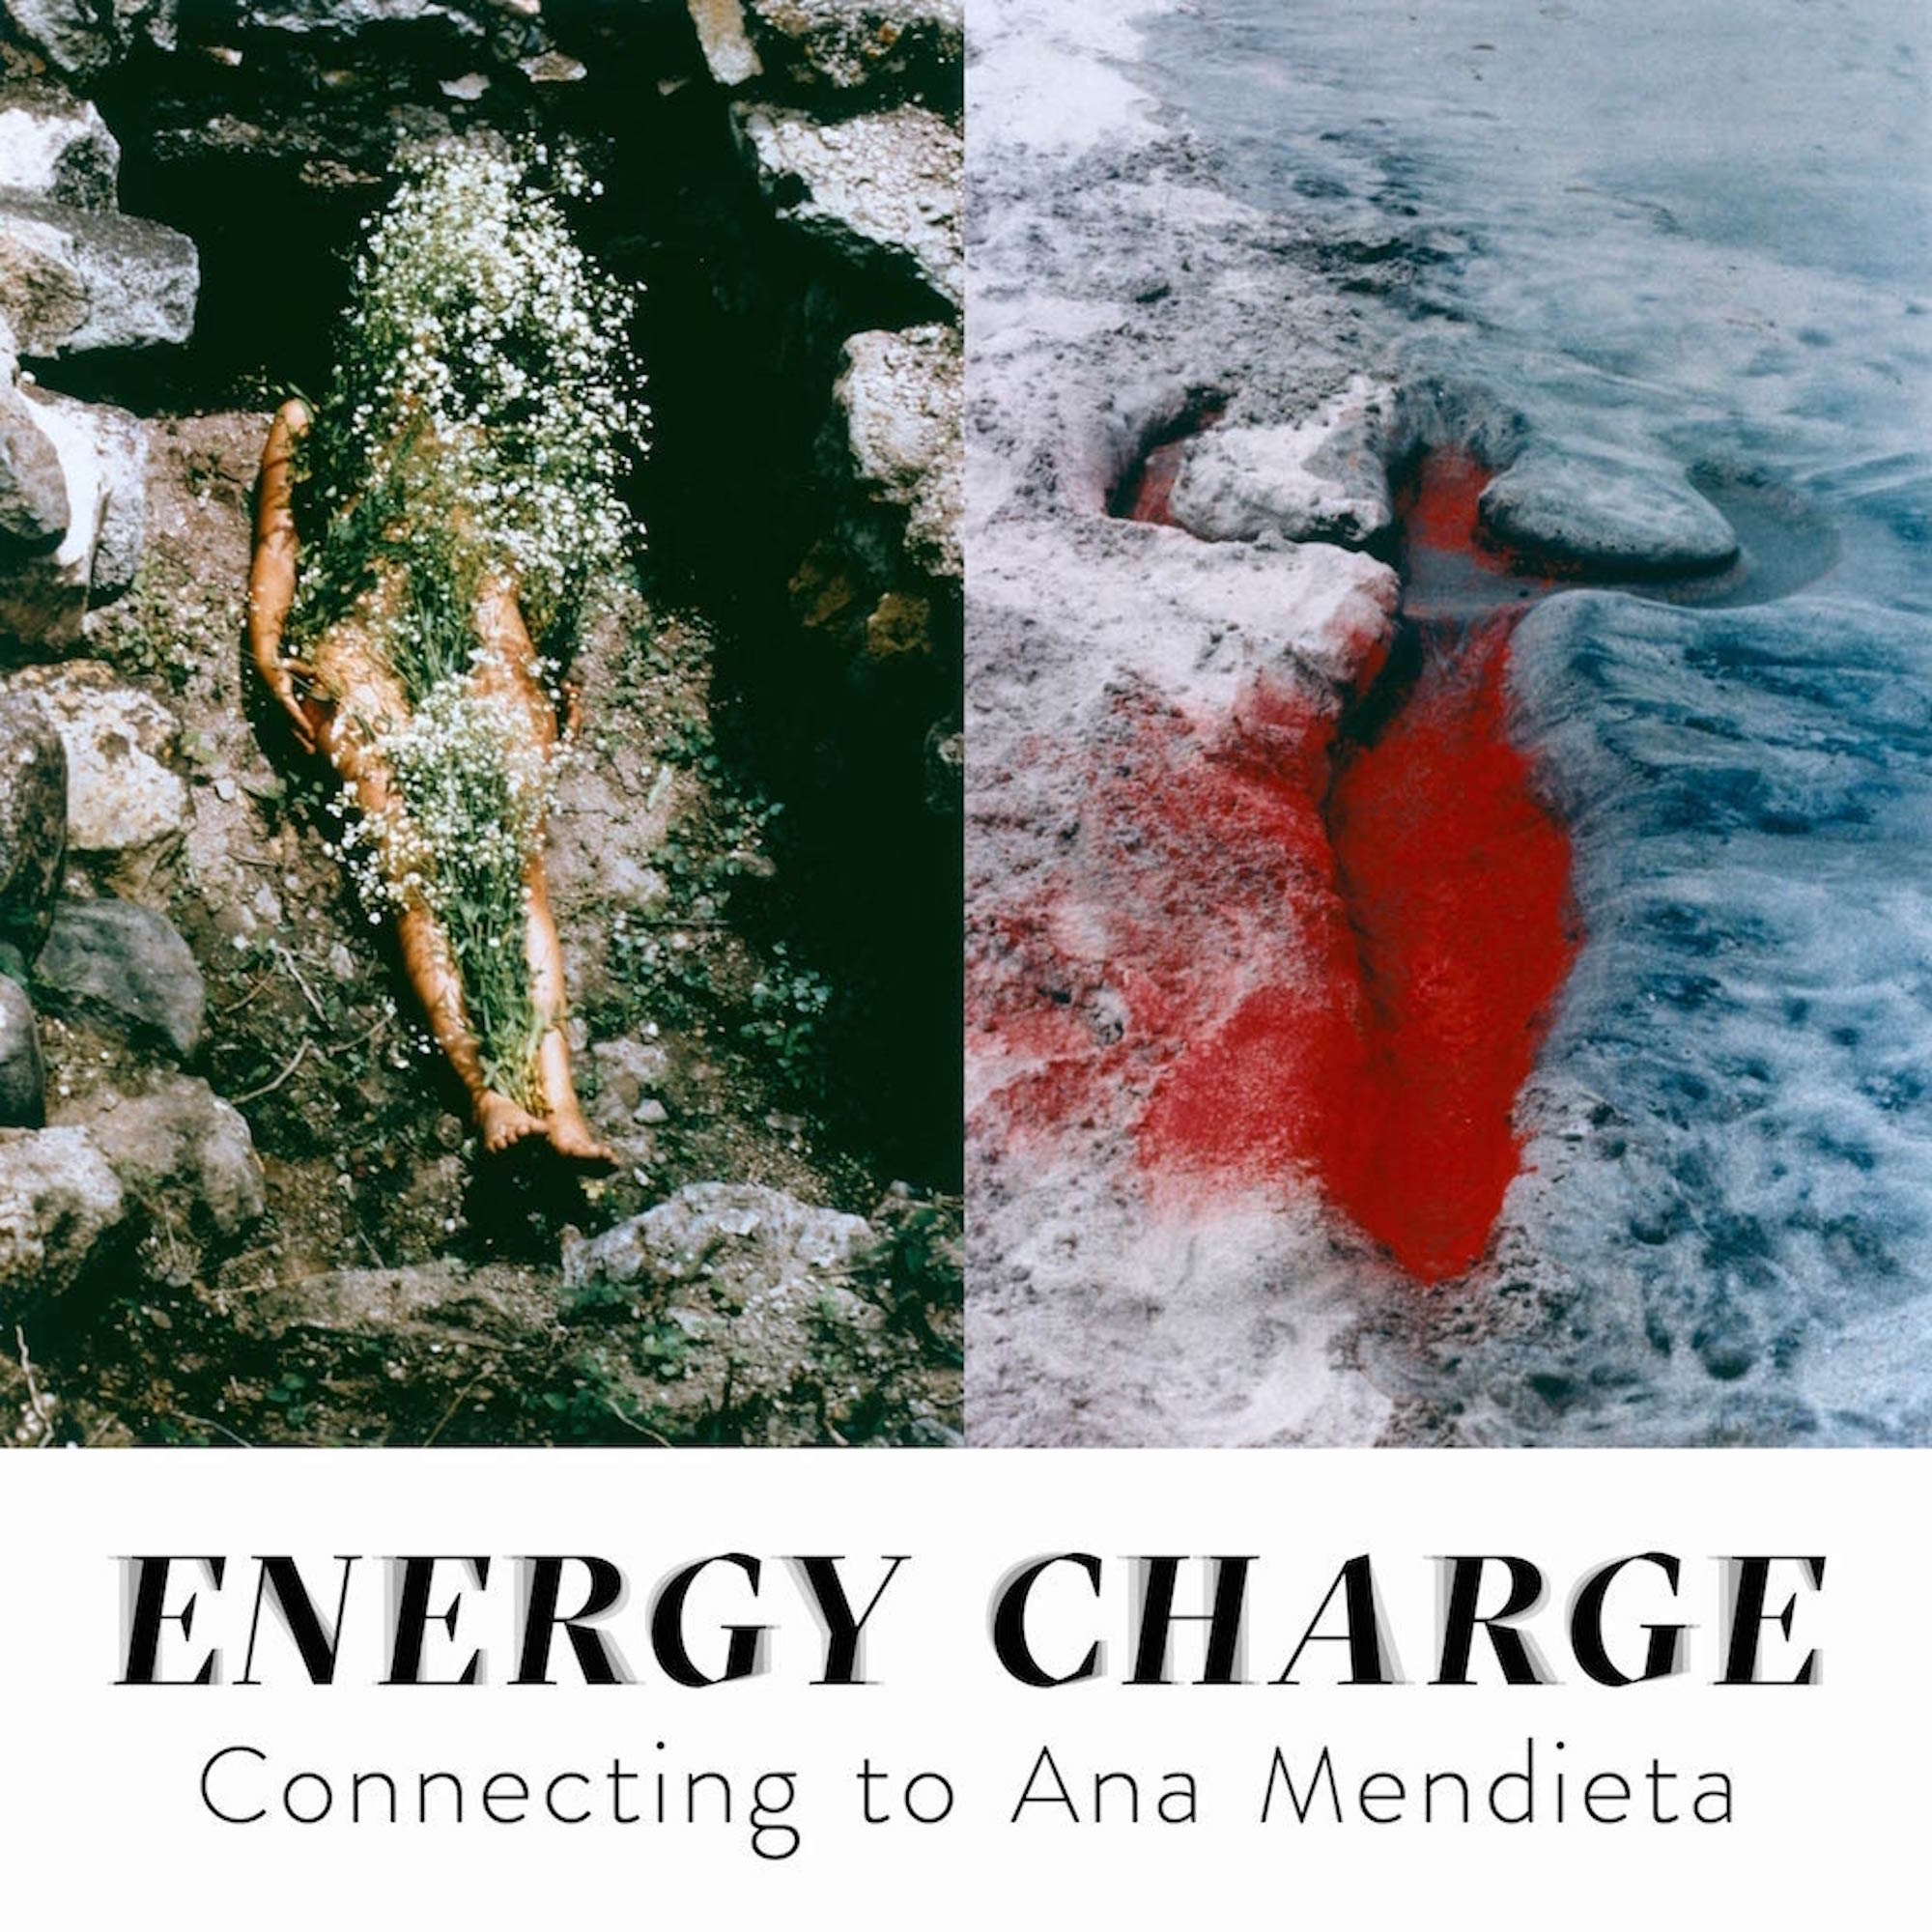 Ana Mendieta Energy Charge includes several iconic pieces by the artist